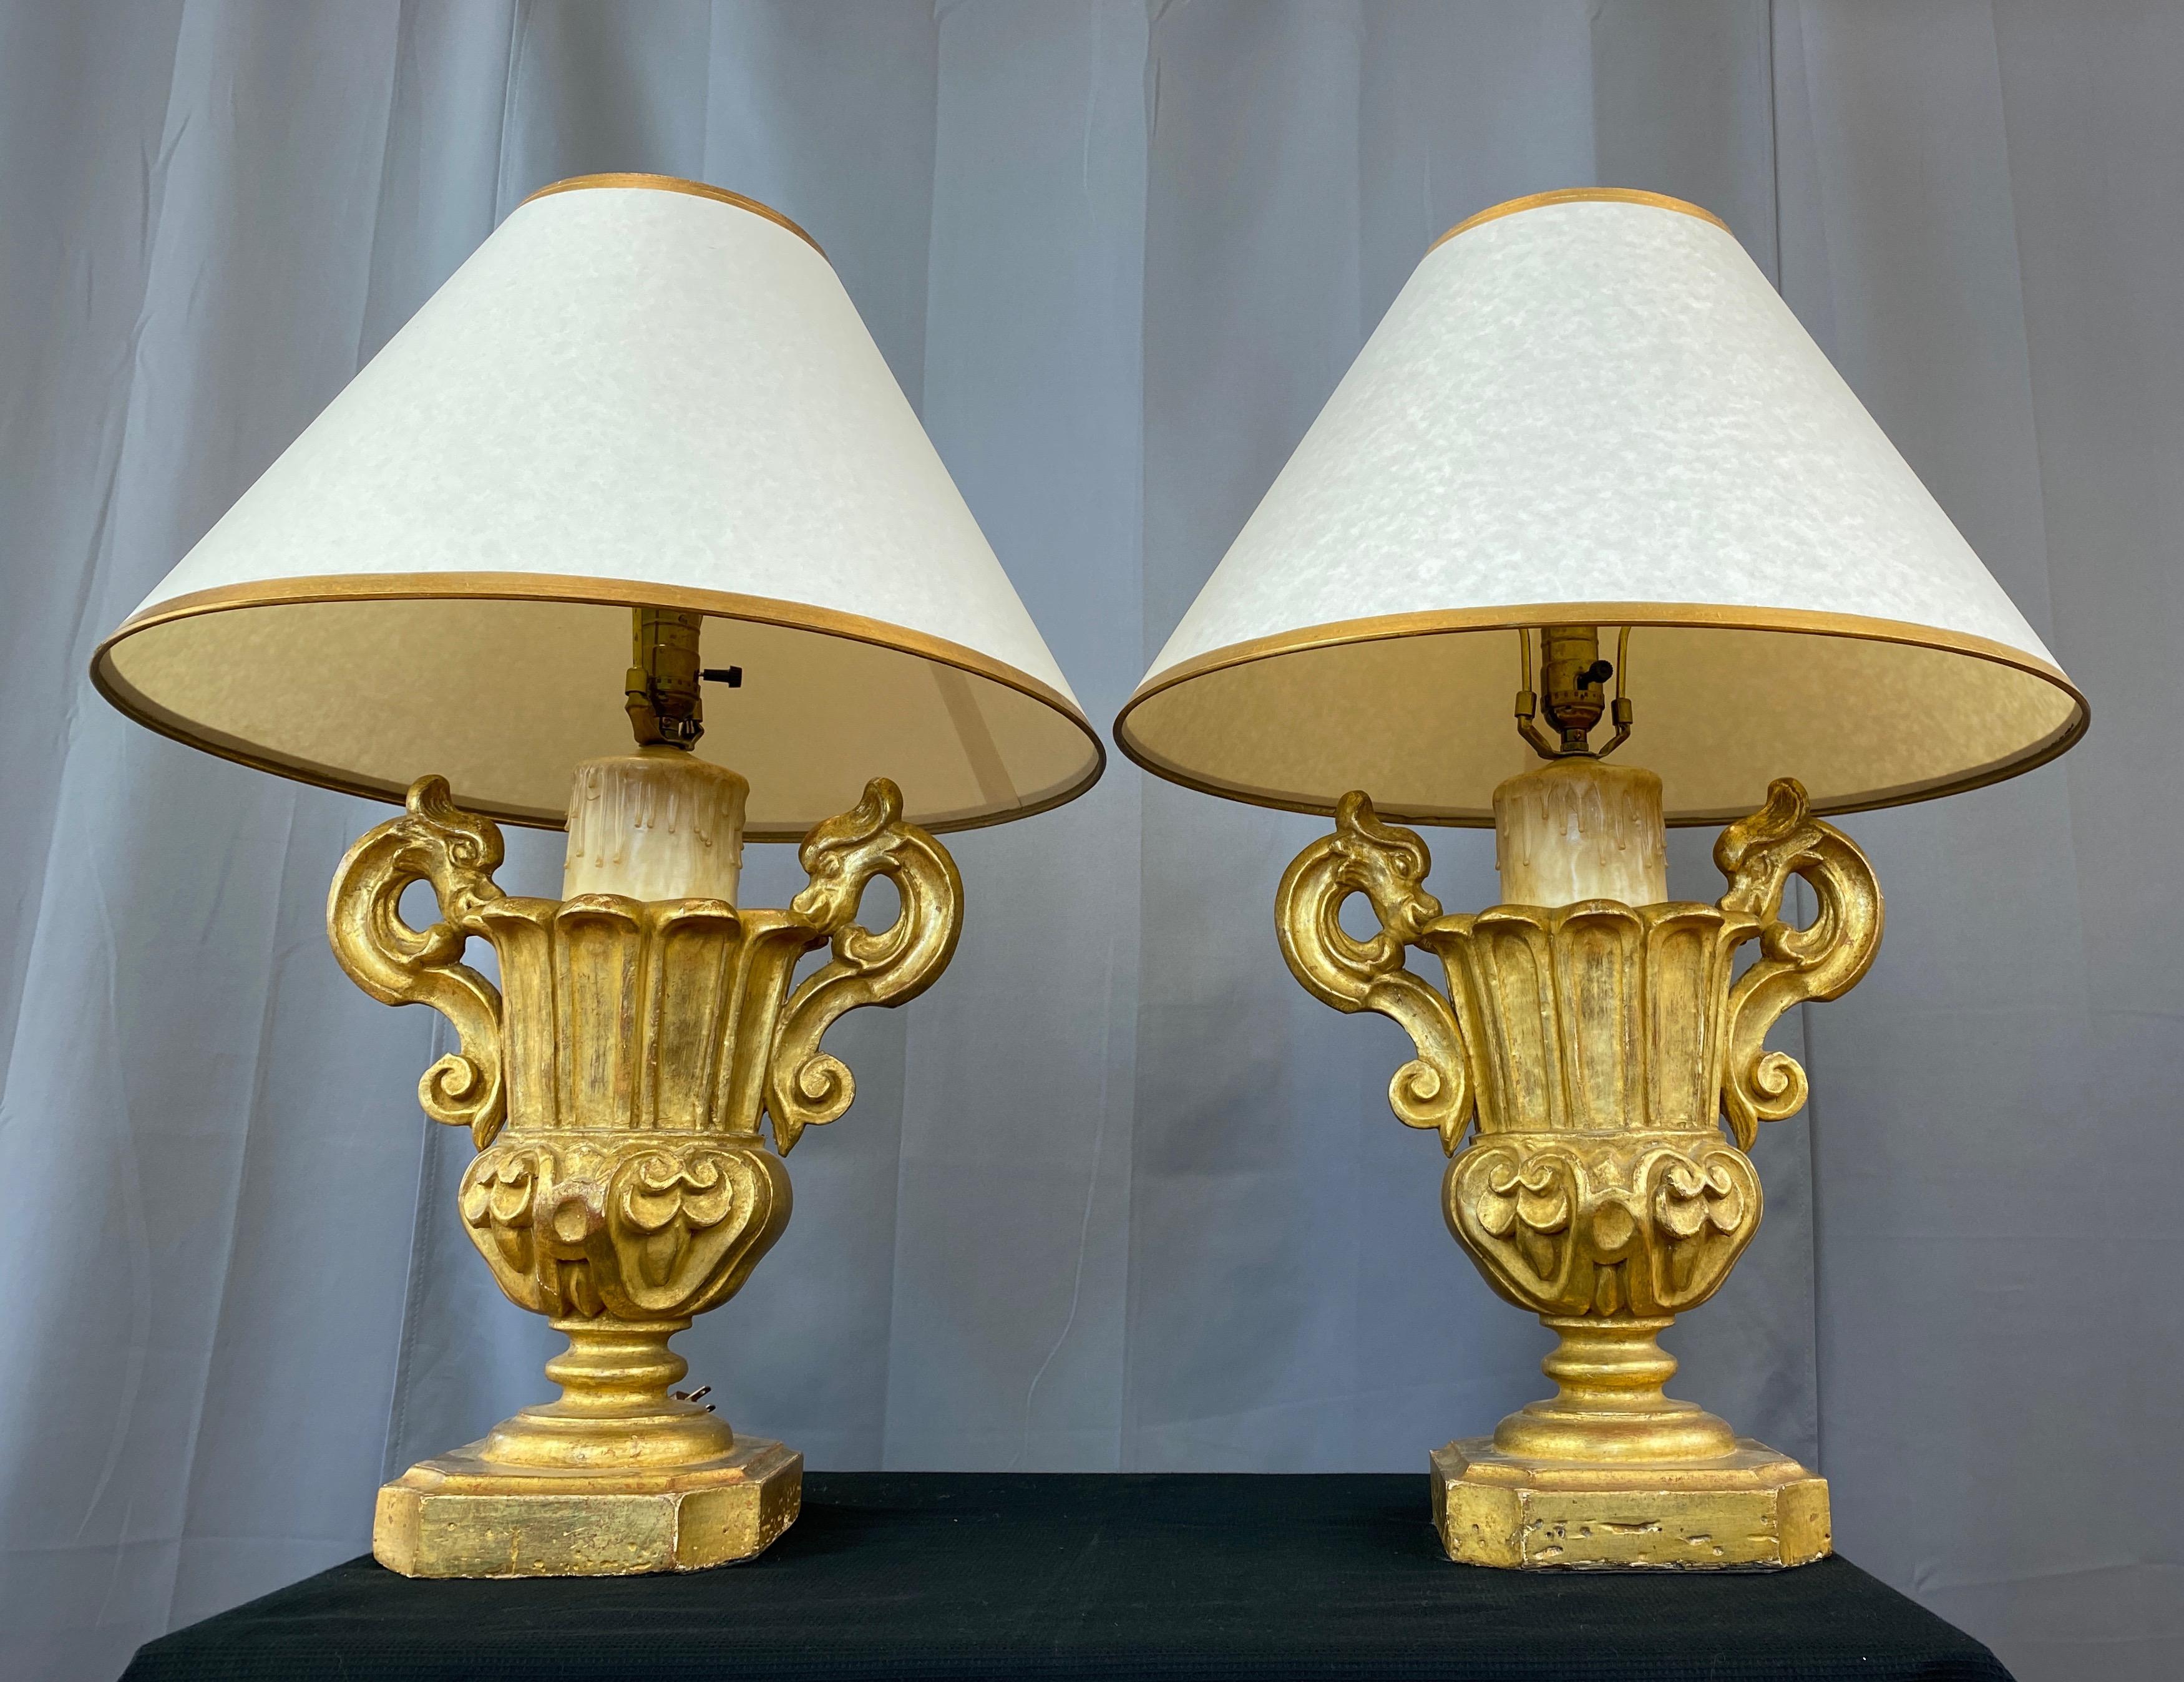 Pair of Italian Baroque Revival Giltwood Urn and Faux Candle Table Lamps, 1930s For Sale 2